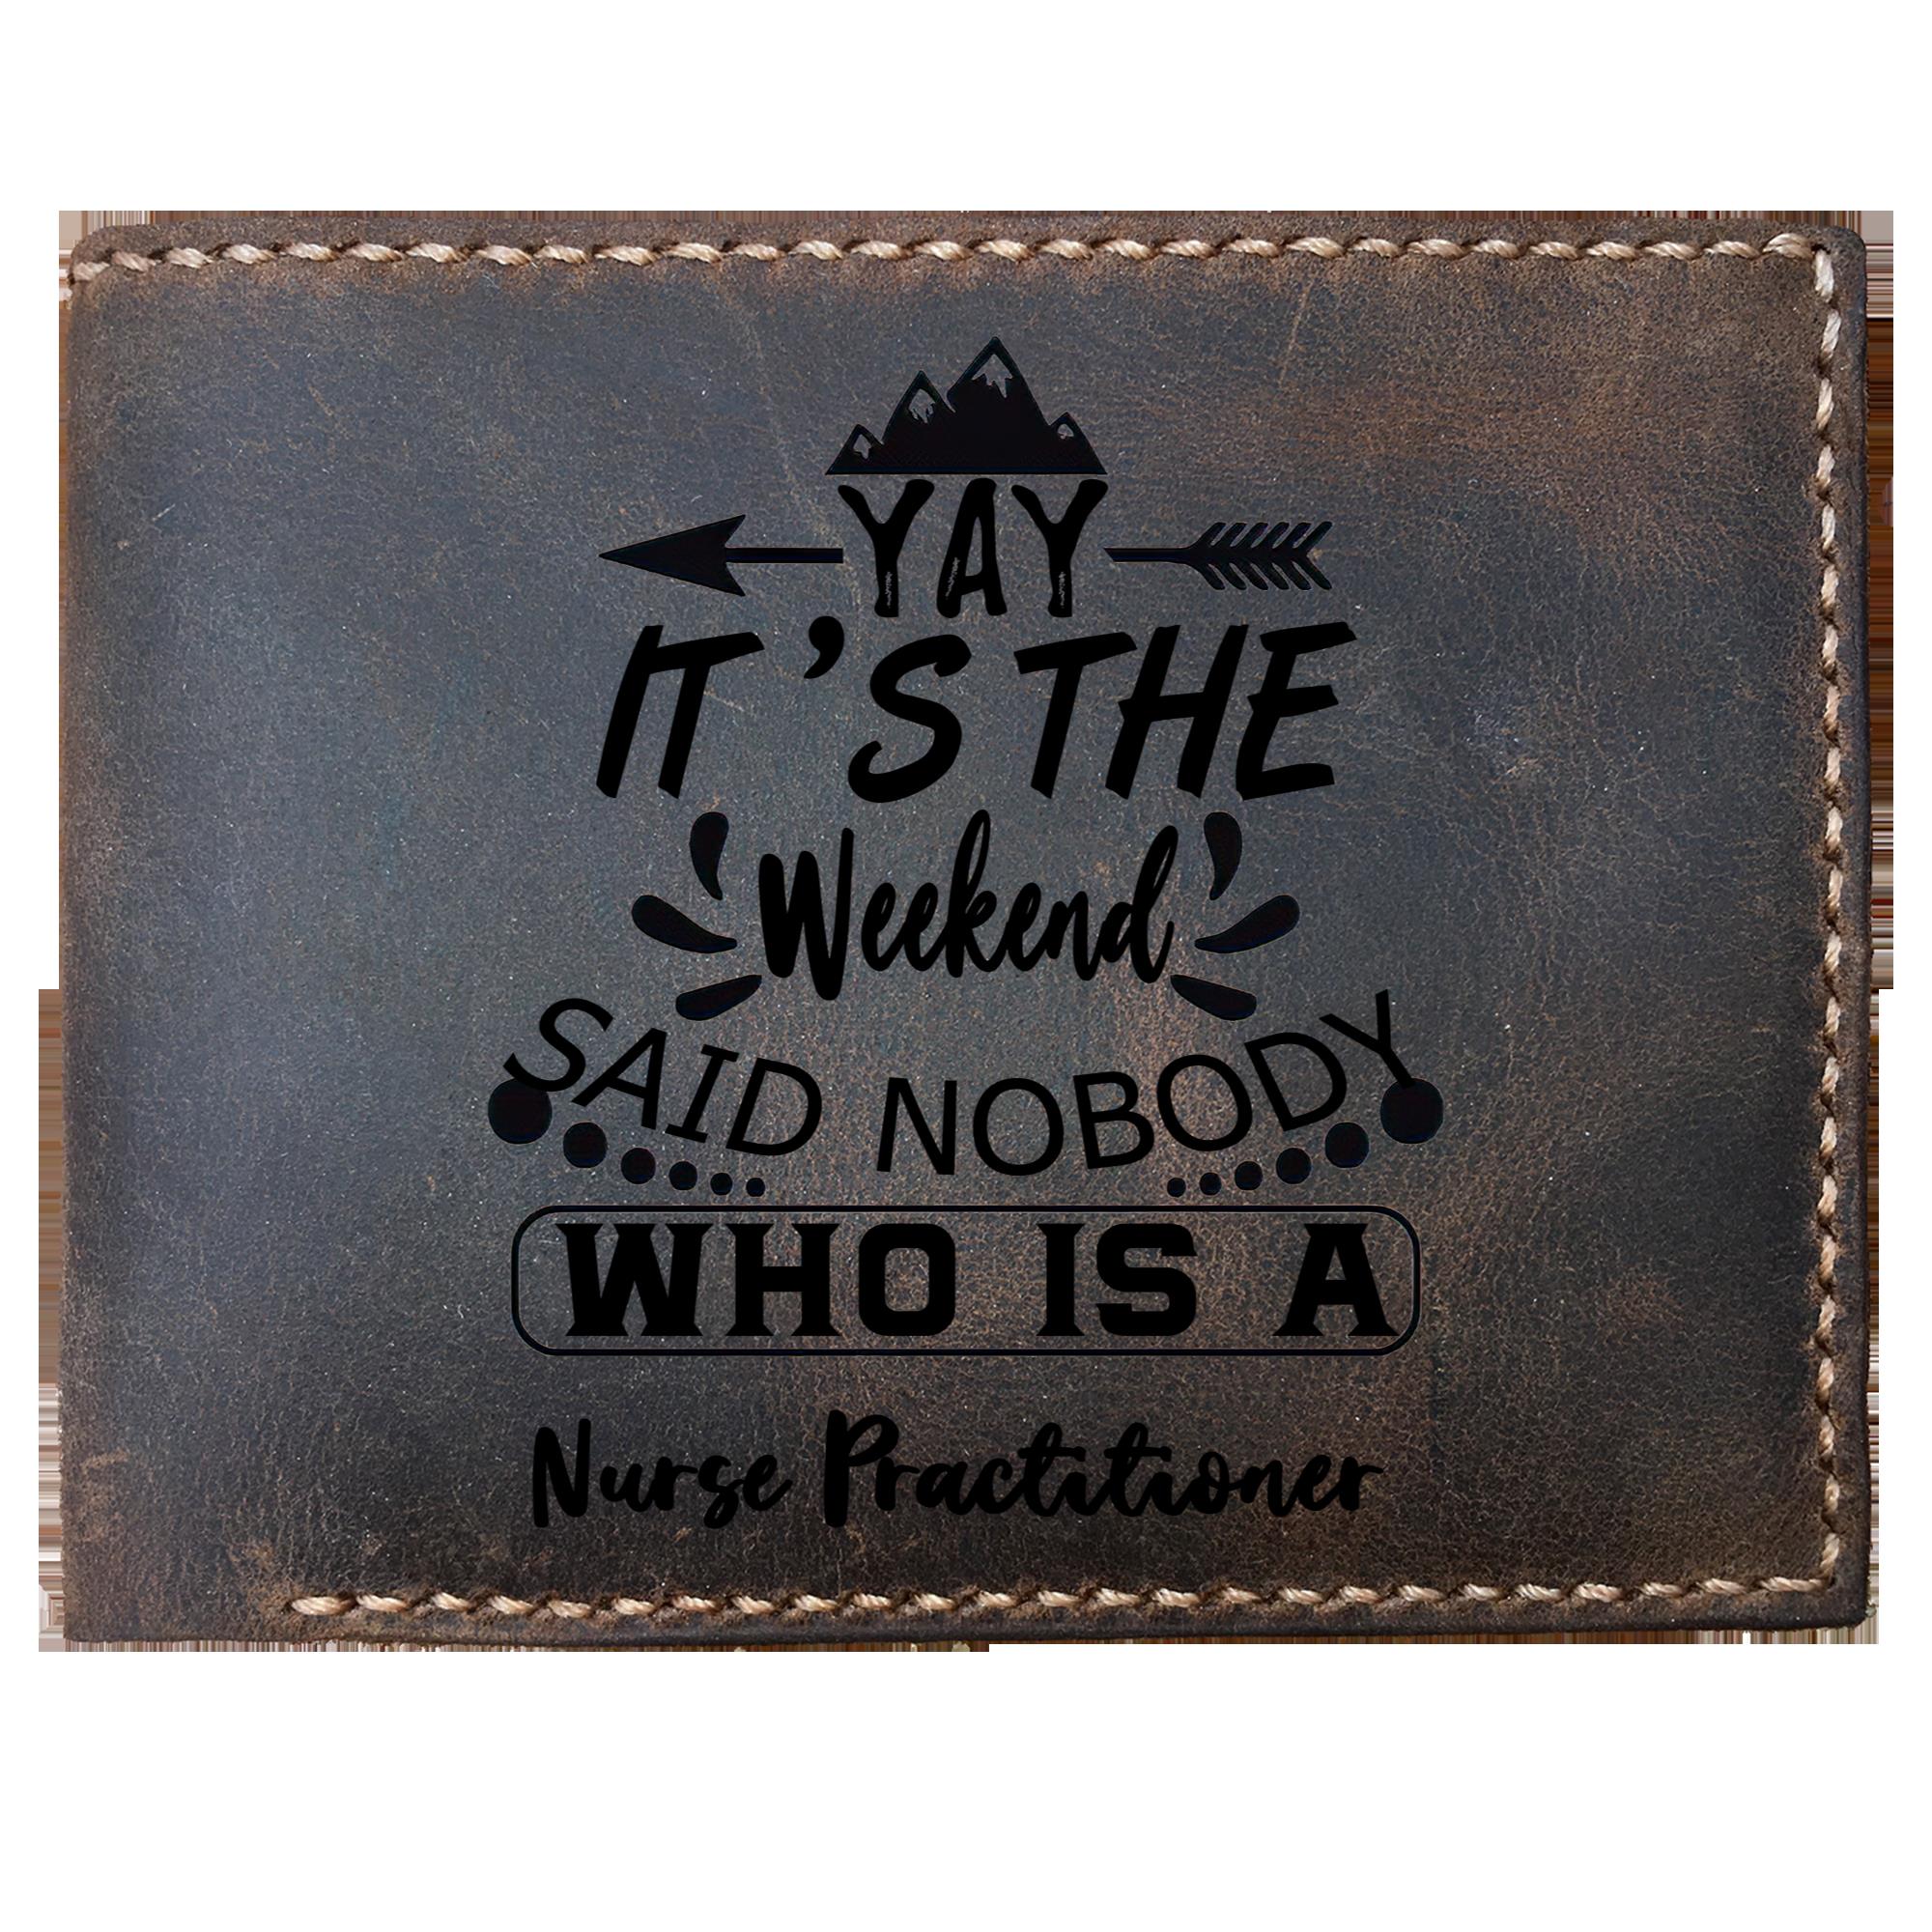 Skitongifts Funny Custom Laser Engraved Bifold Leather Wallet For Men, It's The Weekend Said Nobody Who Is A Nurse Practitioner, Father's Day Gifts